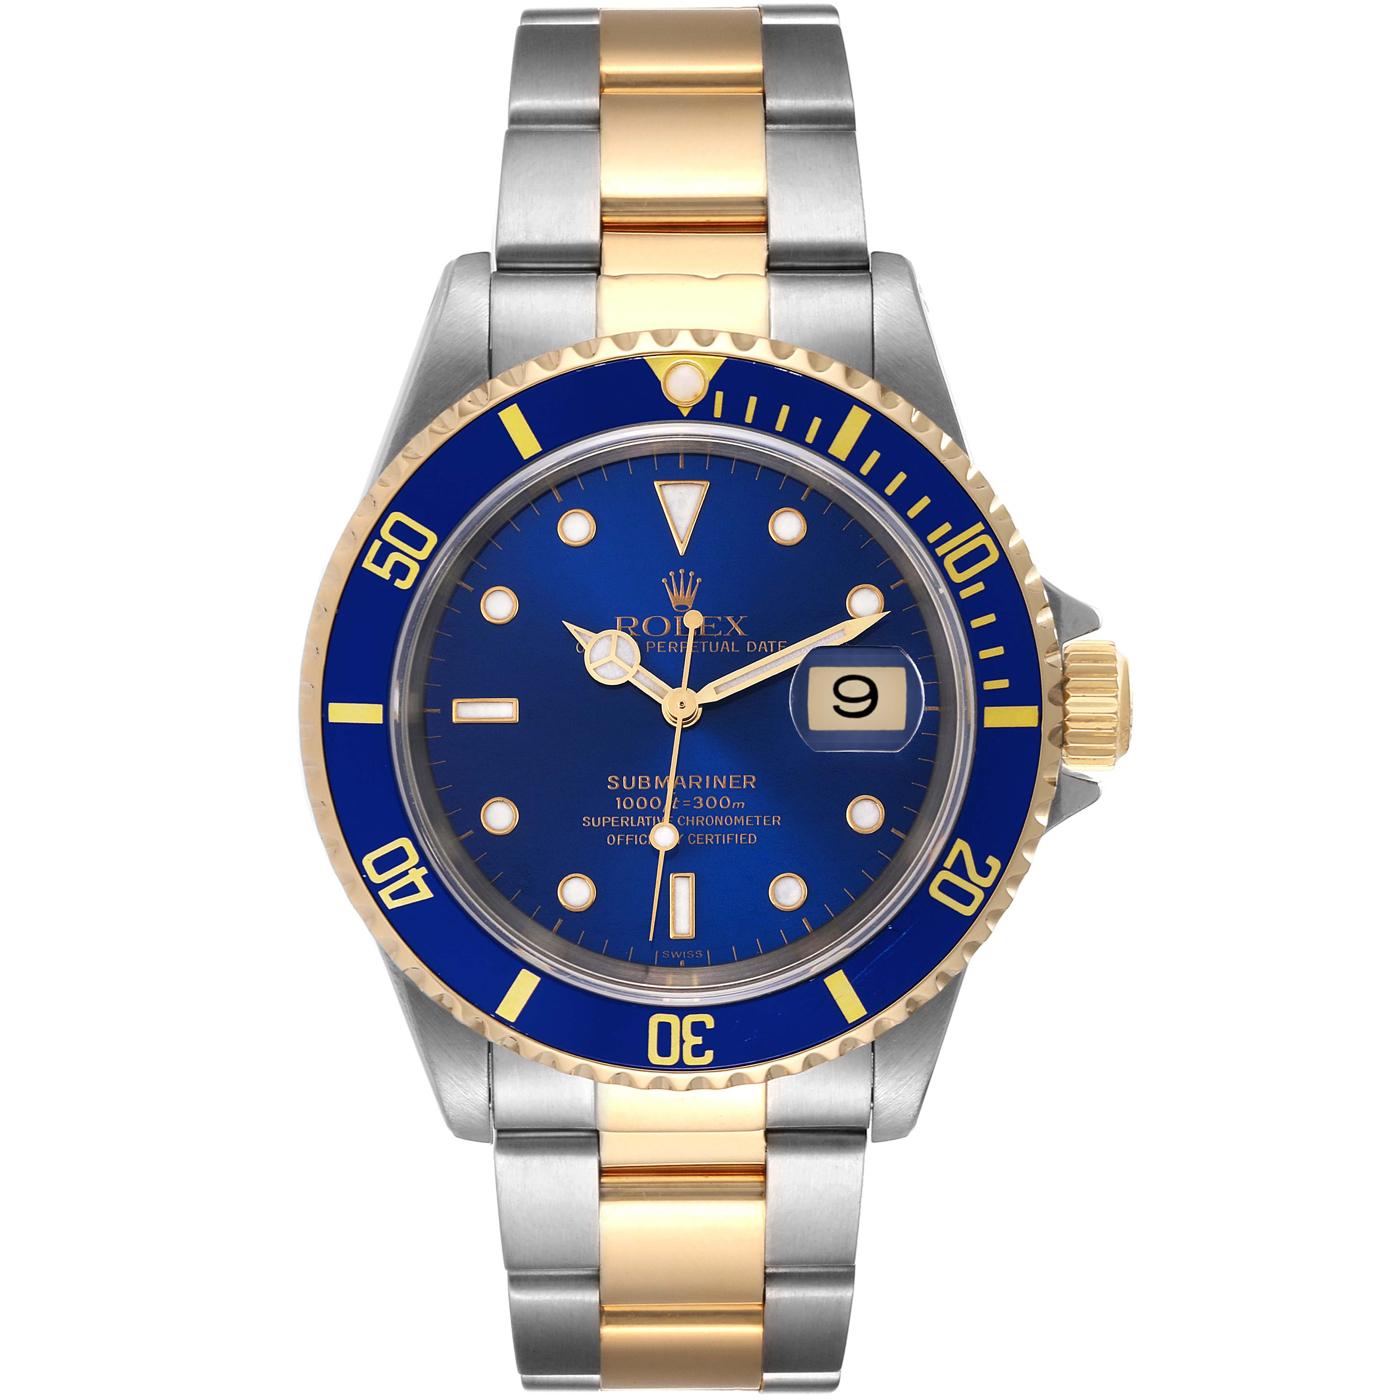 Rolex Submariner Date 40mm stainless steel and 18 karat yellow gold. The Z-serial 16613 includes a box. The Submariner features a blue dial with applied luminescent indices, a date aperture at three o’clock, and a unidirectional bezel. The case is